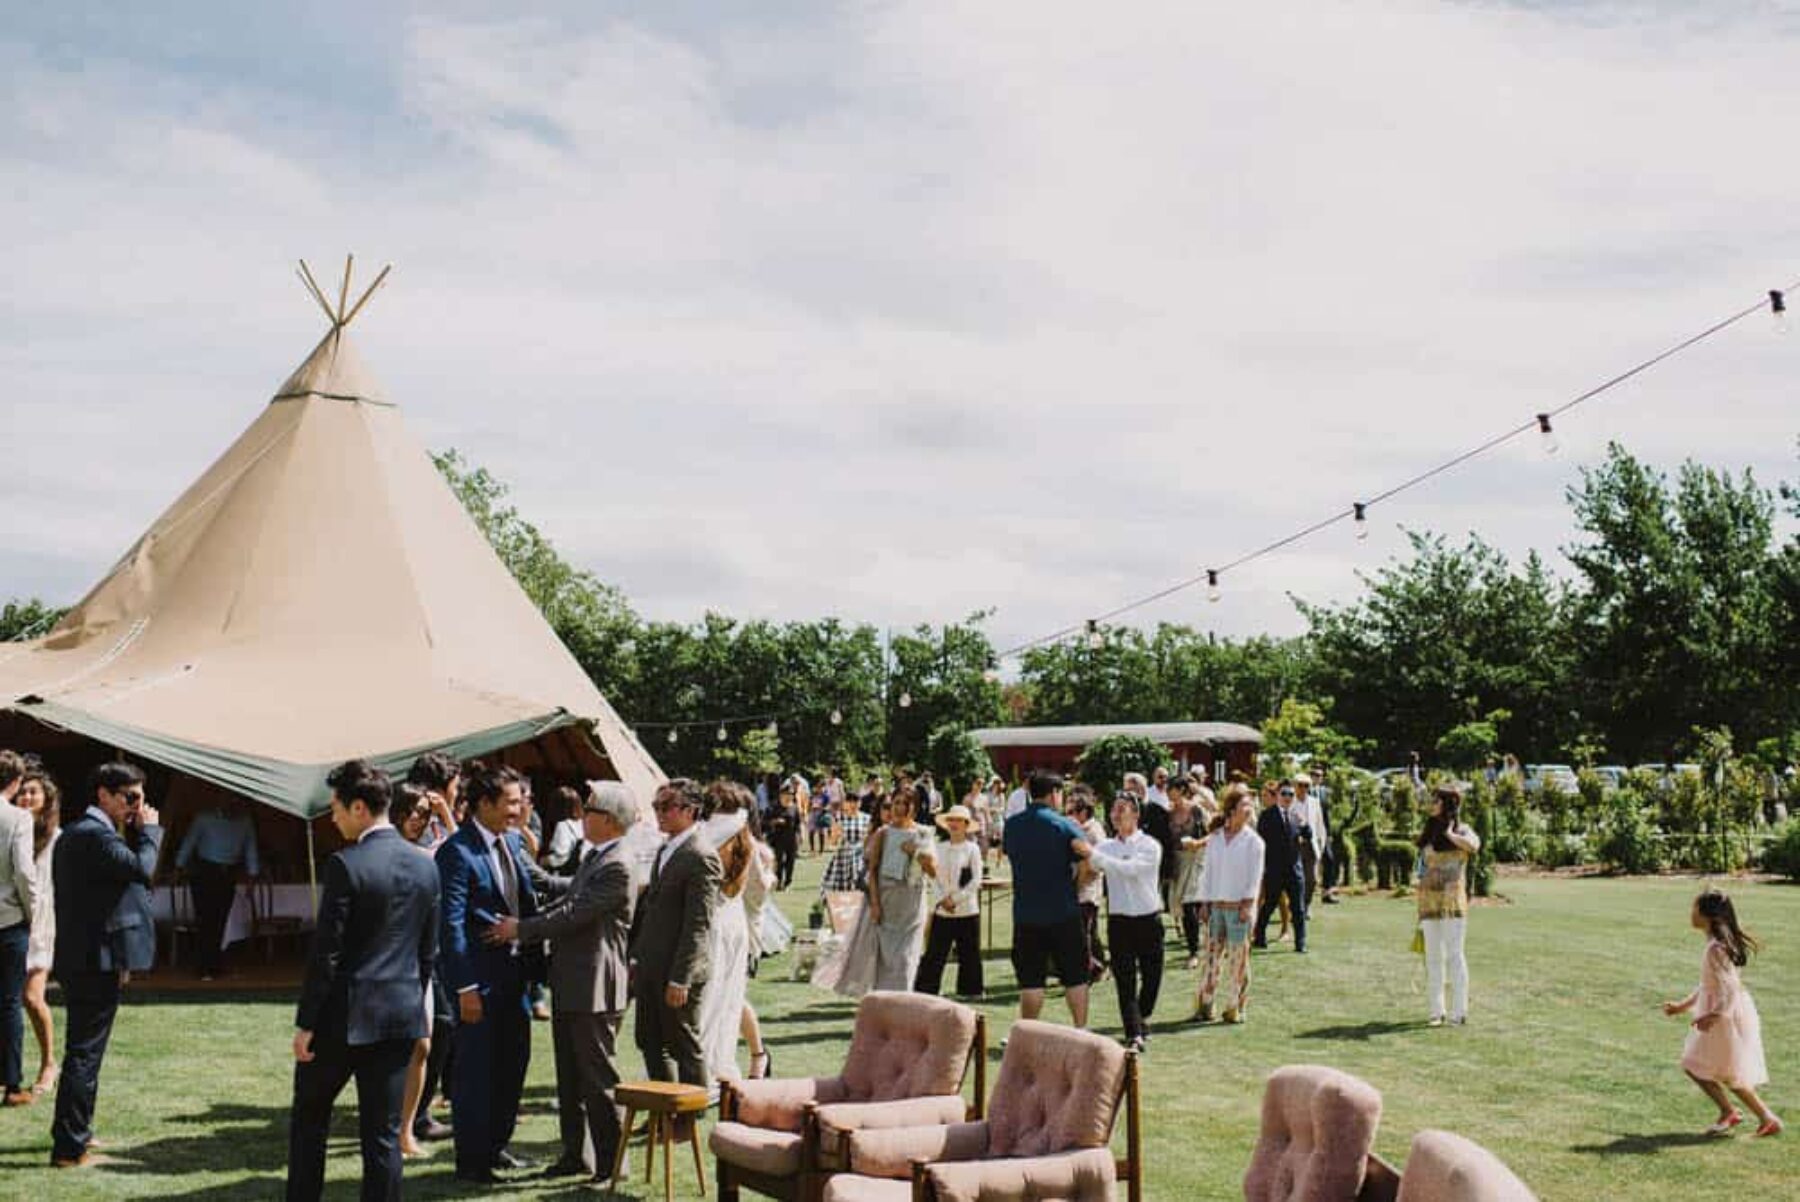 Boho tipi wedding on an olive farm in Christchurch NZ - photography by Paul Tatterson